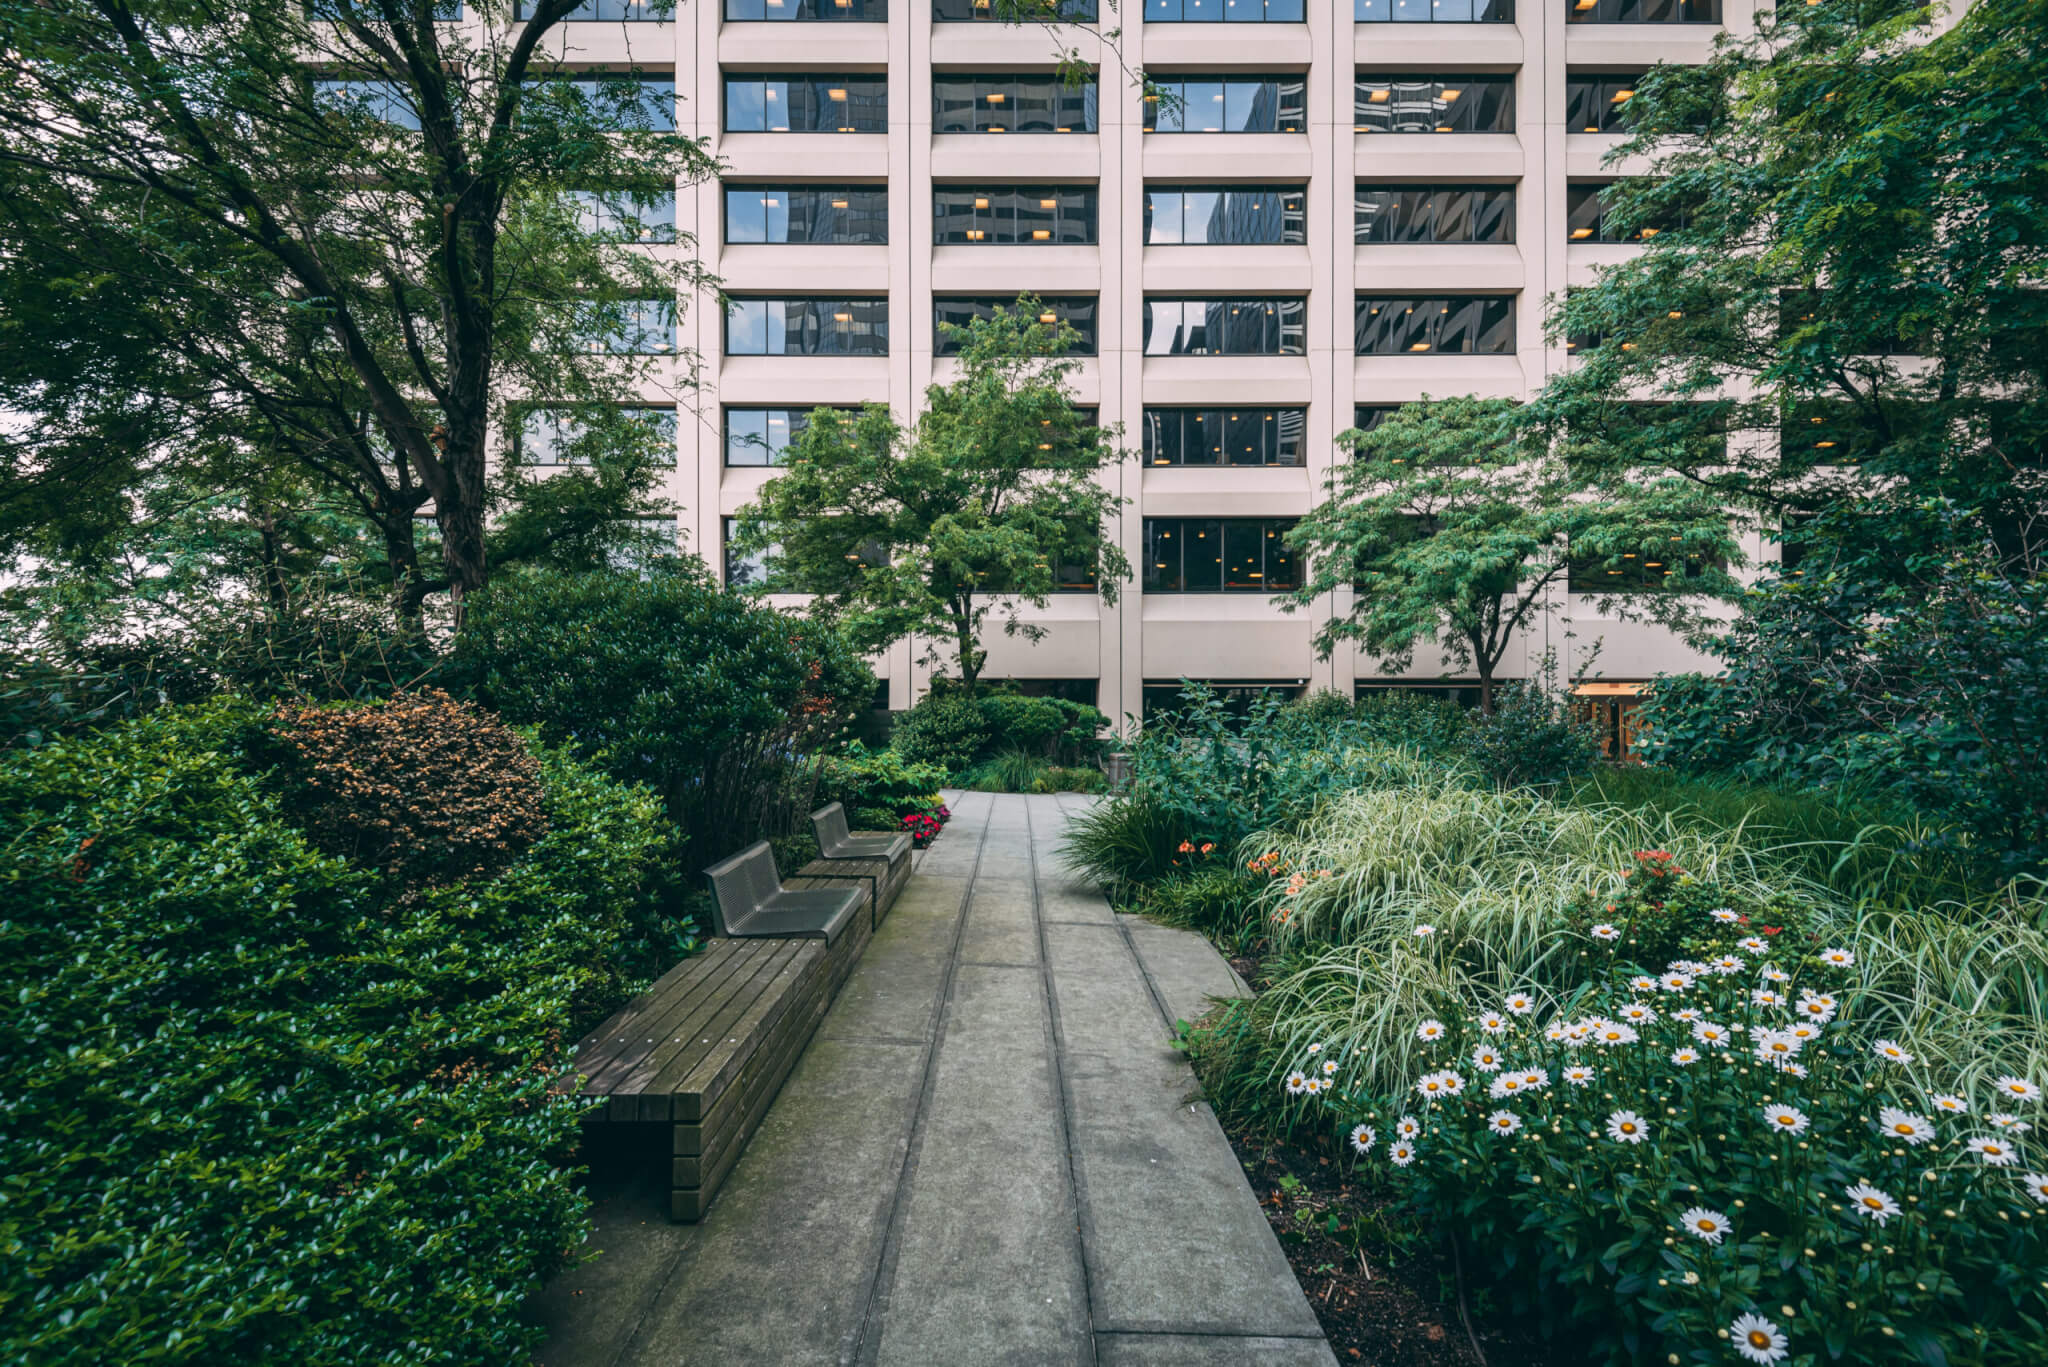 Garden at the Elevated Acre, in the Financial District, Manhattan, New York City